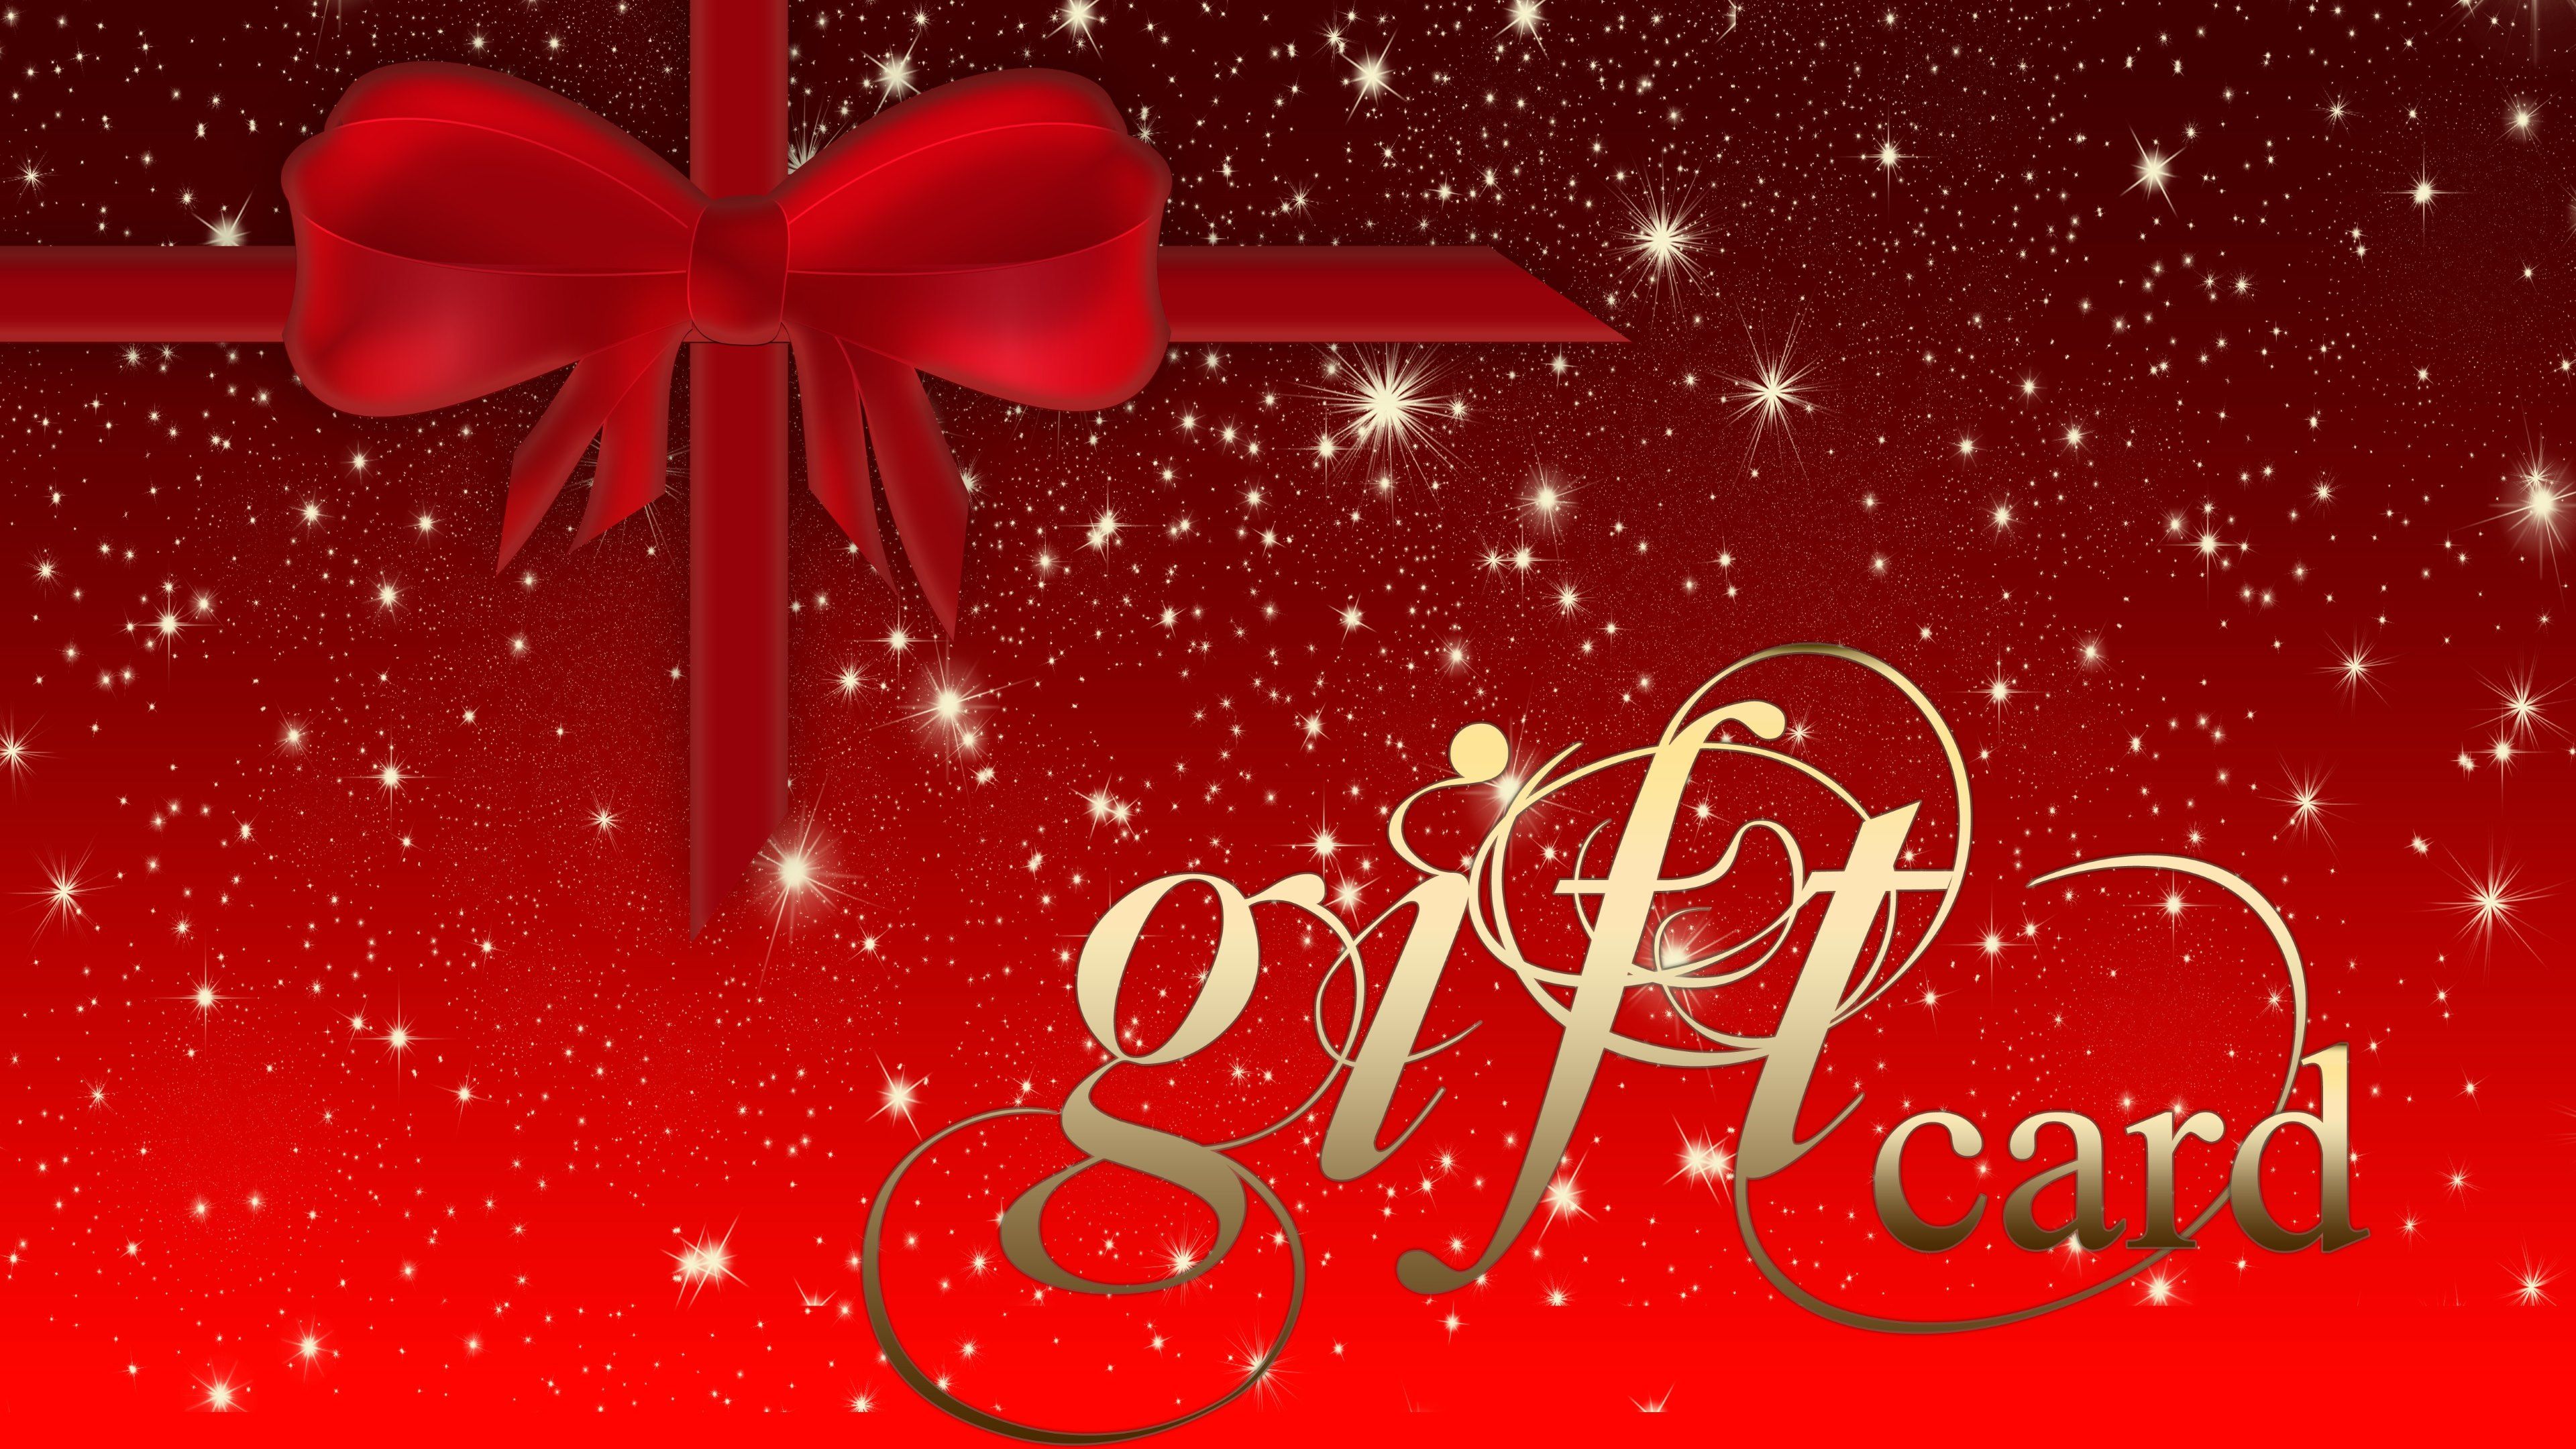 Christmas Cards And Gifts Wallpapers Wallpaper Cave